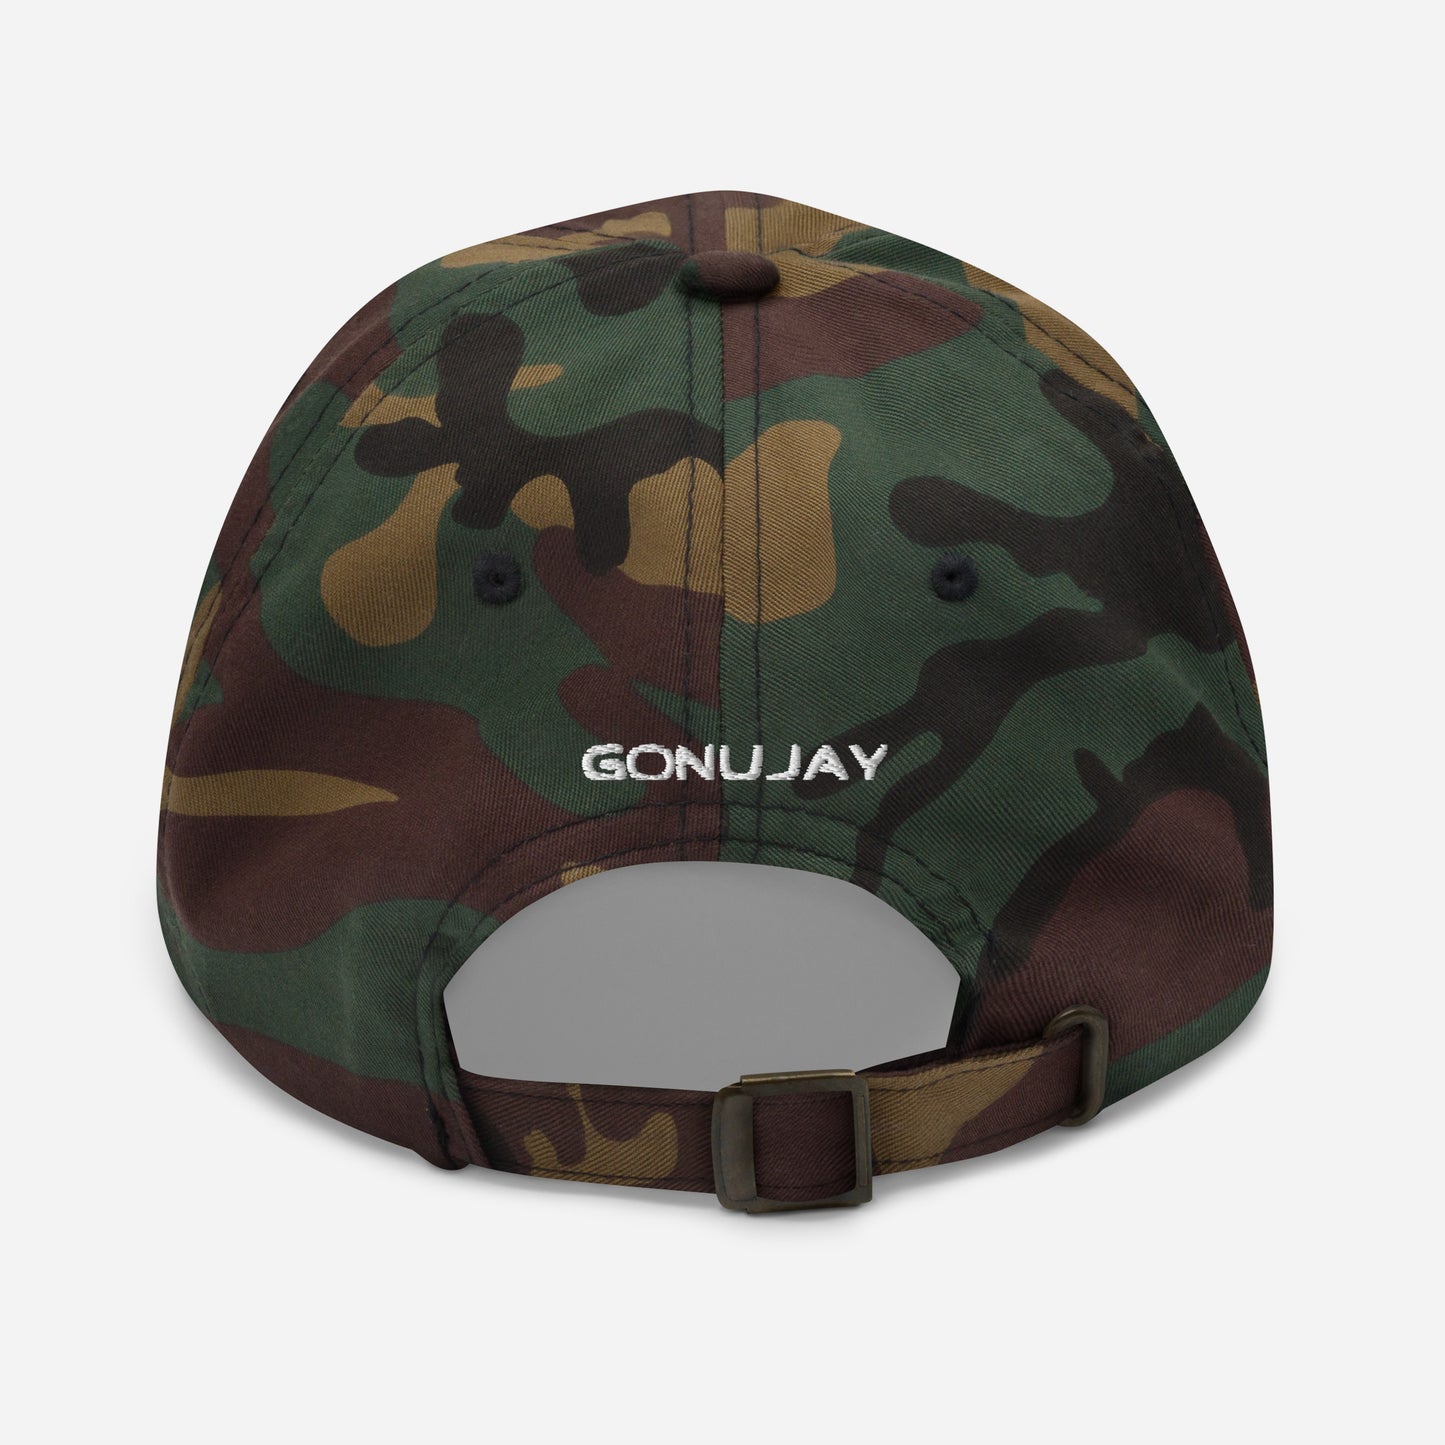 Nujay Outdoors Camo Dad Hat